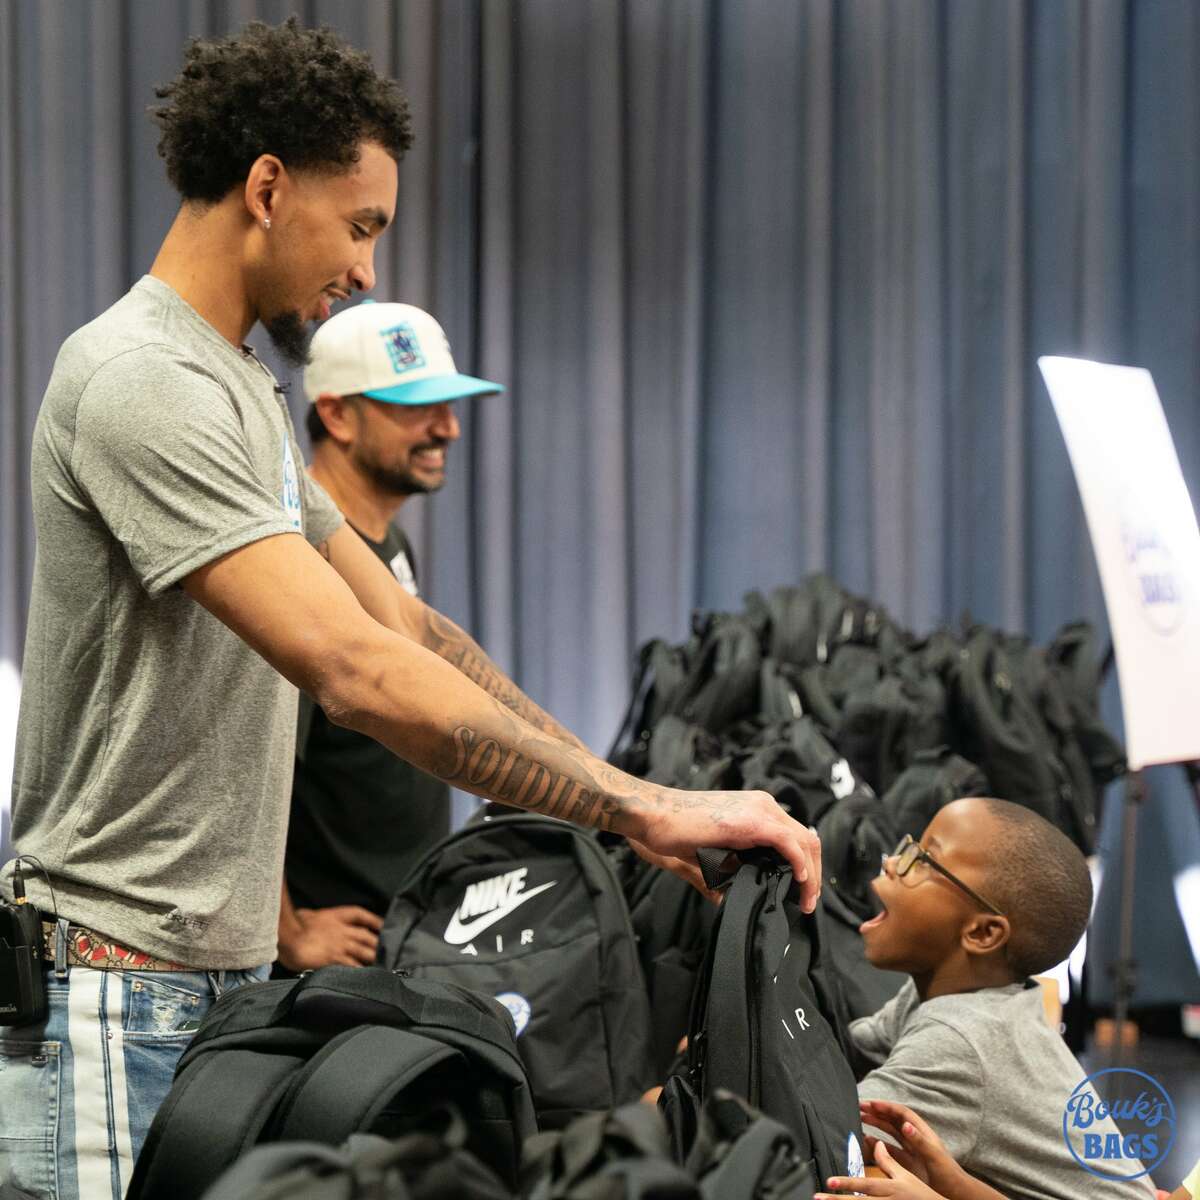 James Bounkight hands the students special Air Jordan backpacks